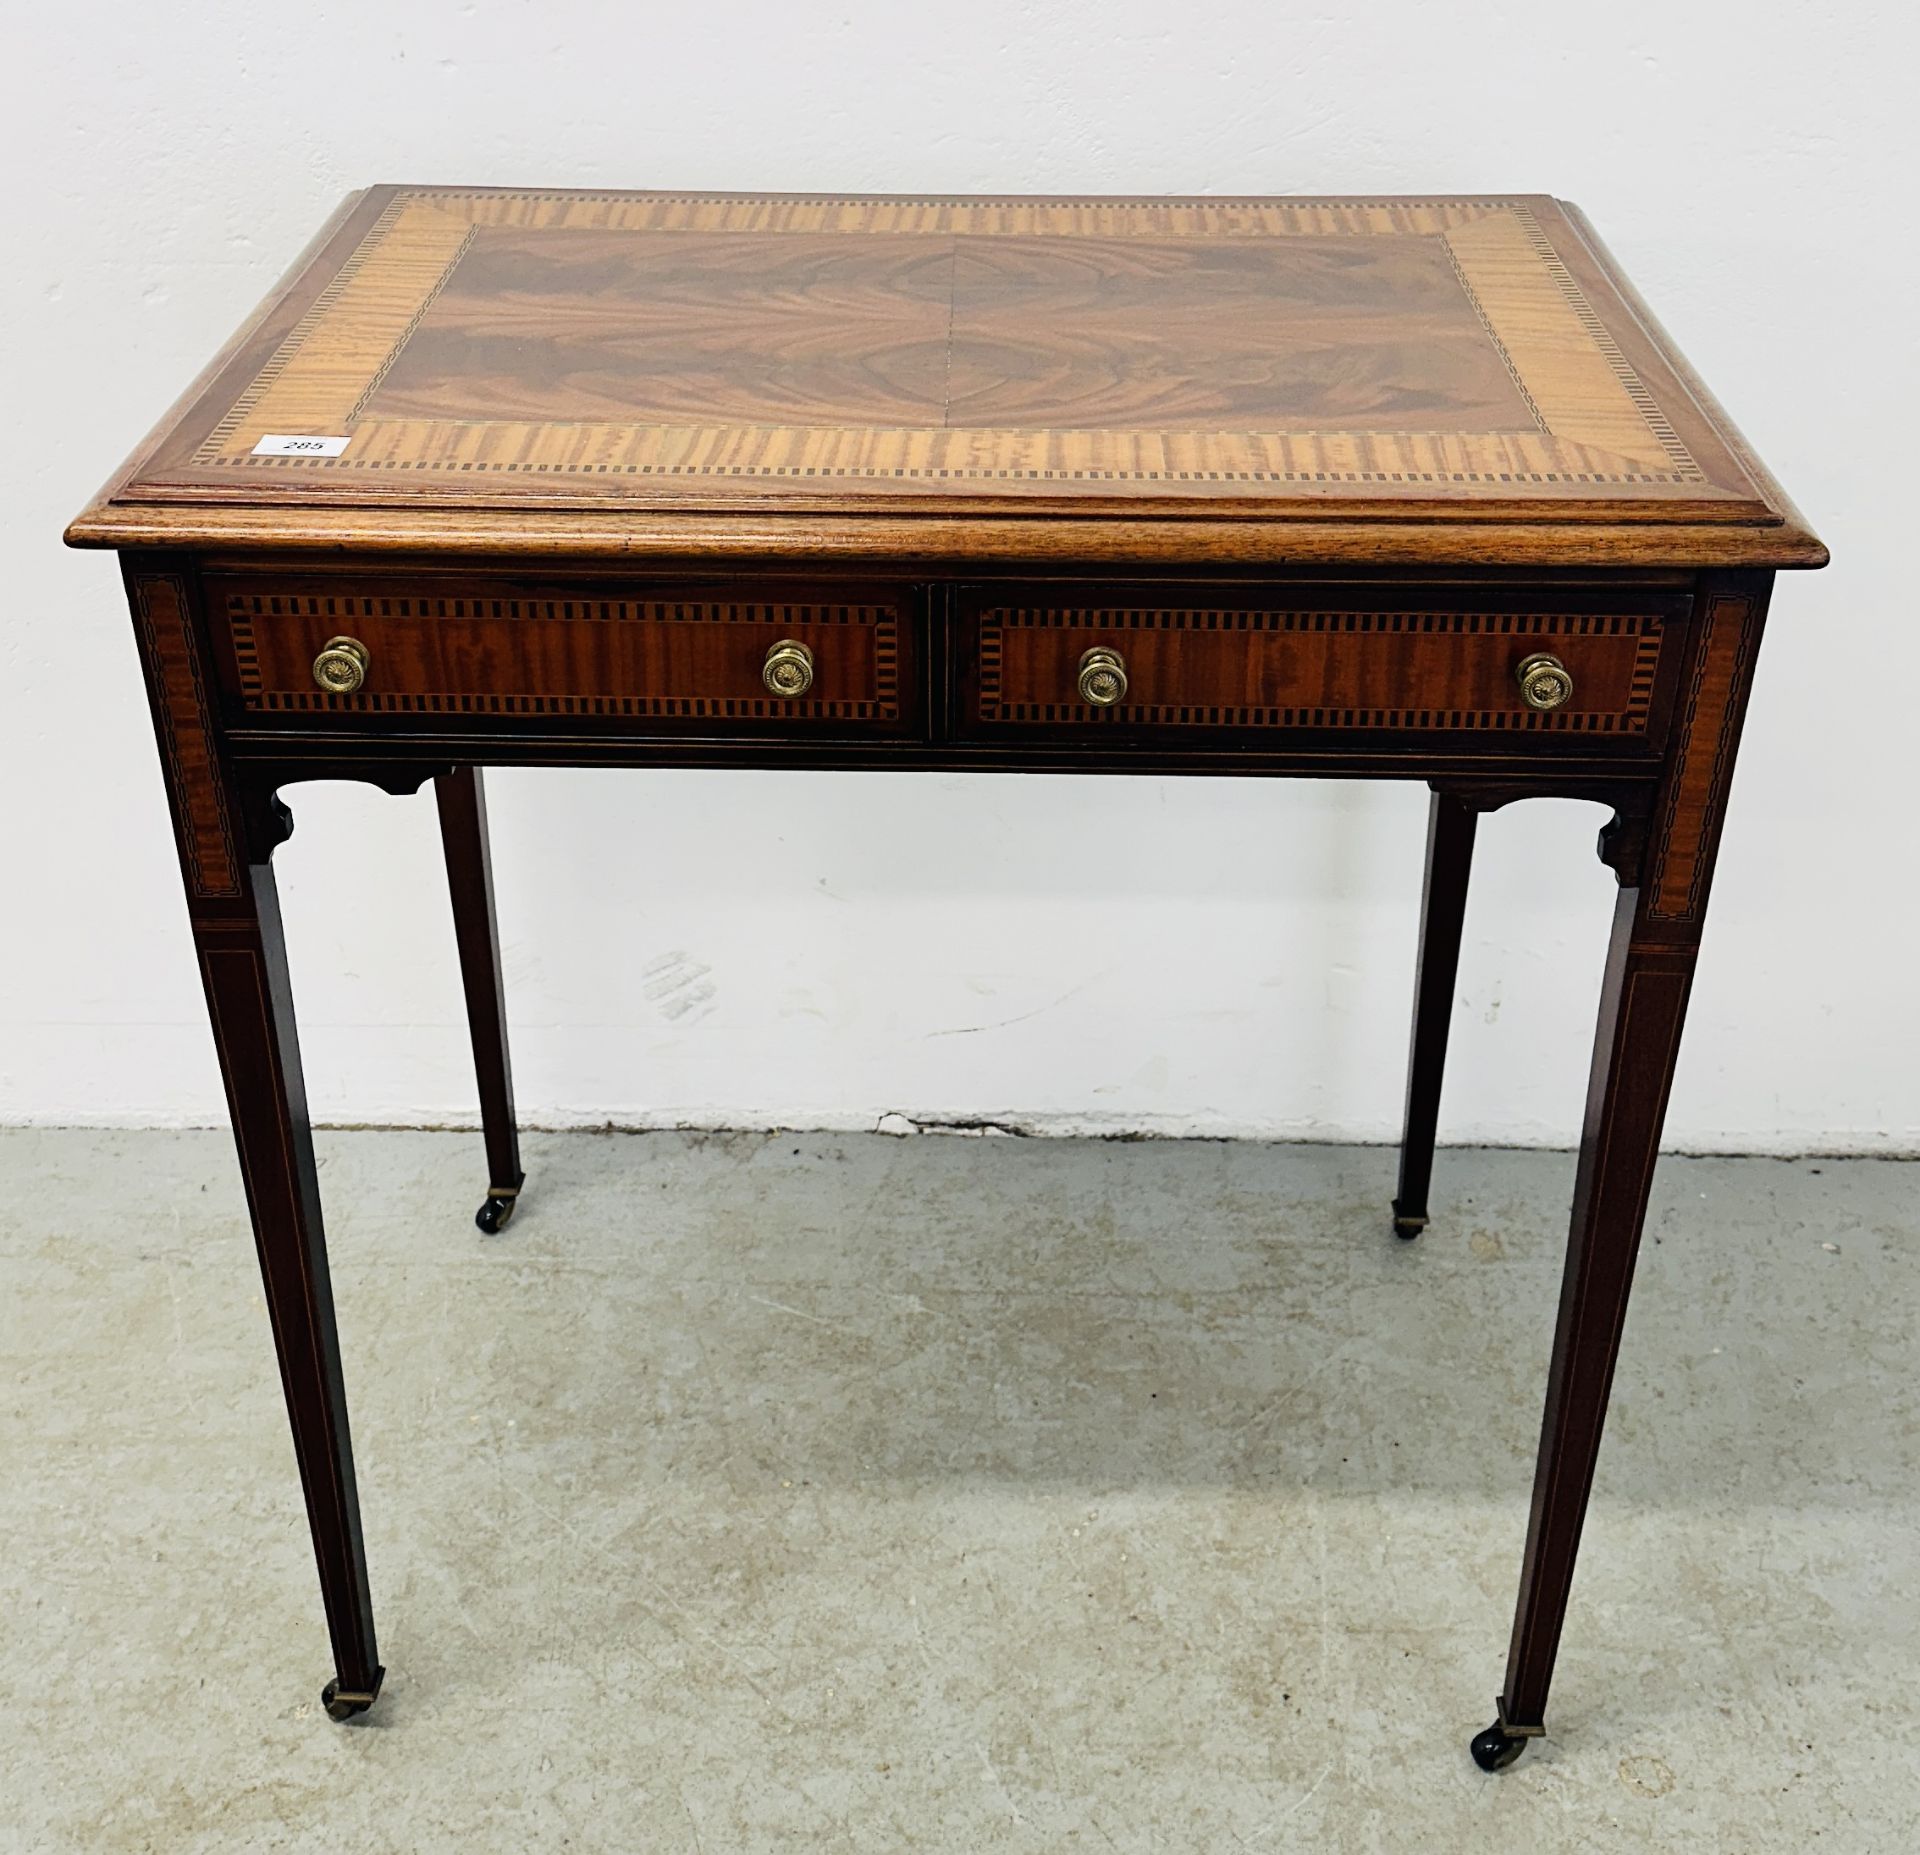 ANTIQUE MAHOGANY & INLAID 2 DRAWER WRITING TABLE WITH BRASS DETAILED HANDLES STANDING ON CASTERS,